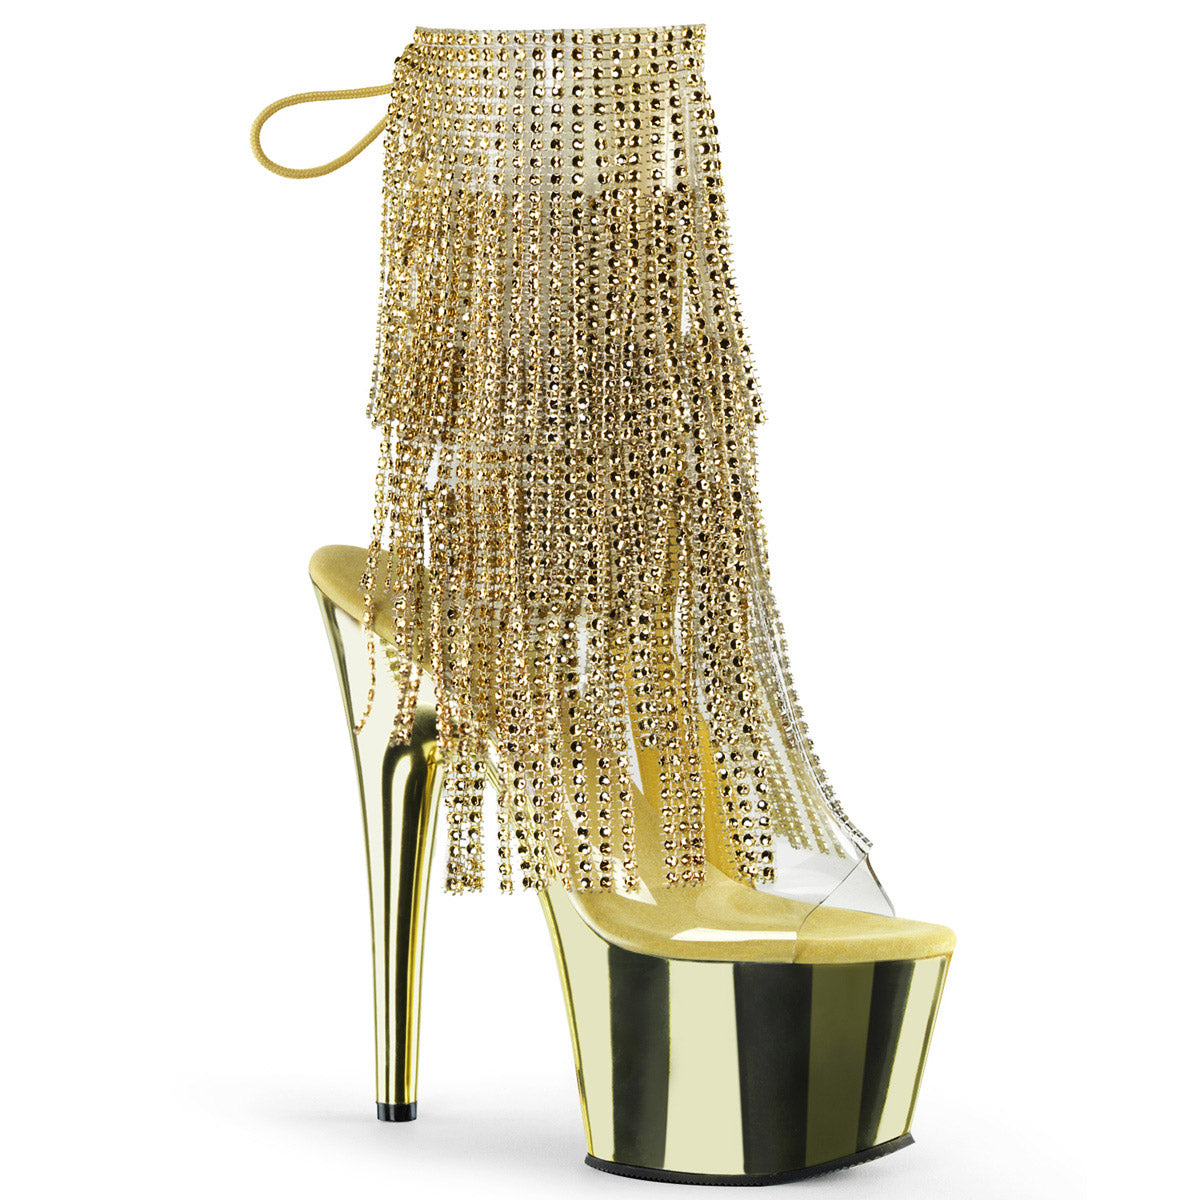 7" Heel, 2 3/4" PF Open Toe/Heel Lace-Up Fringe Ankle Boot Clr-Gold/Gold Chrome Pleaser Pleaser ADORE/1017RSF